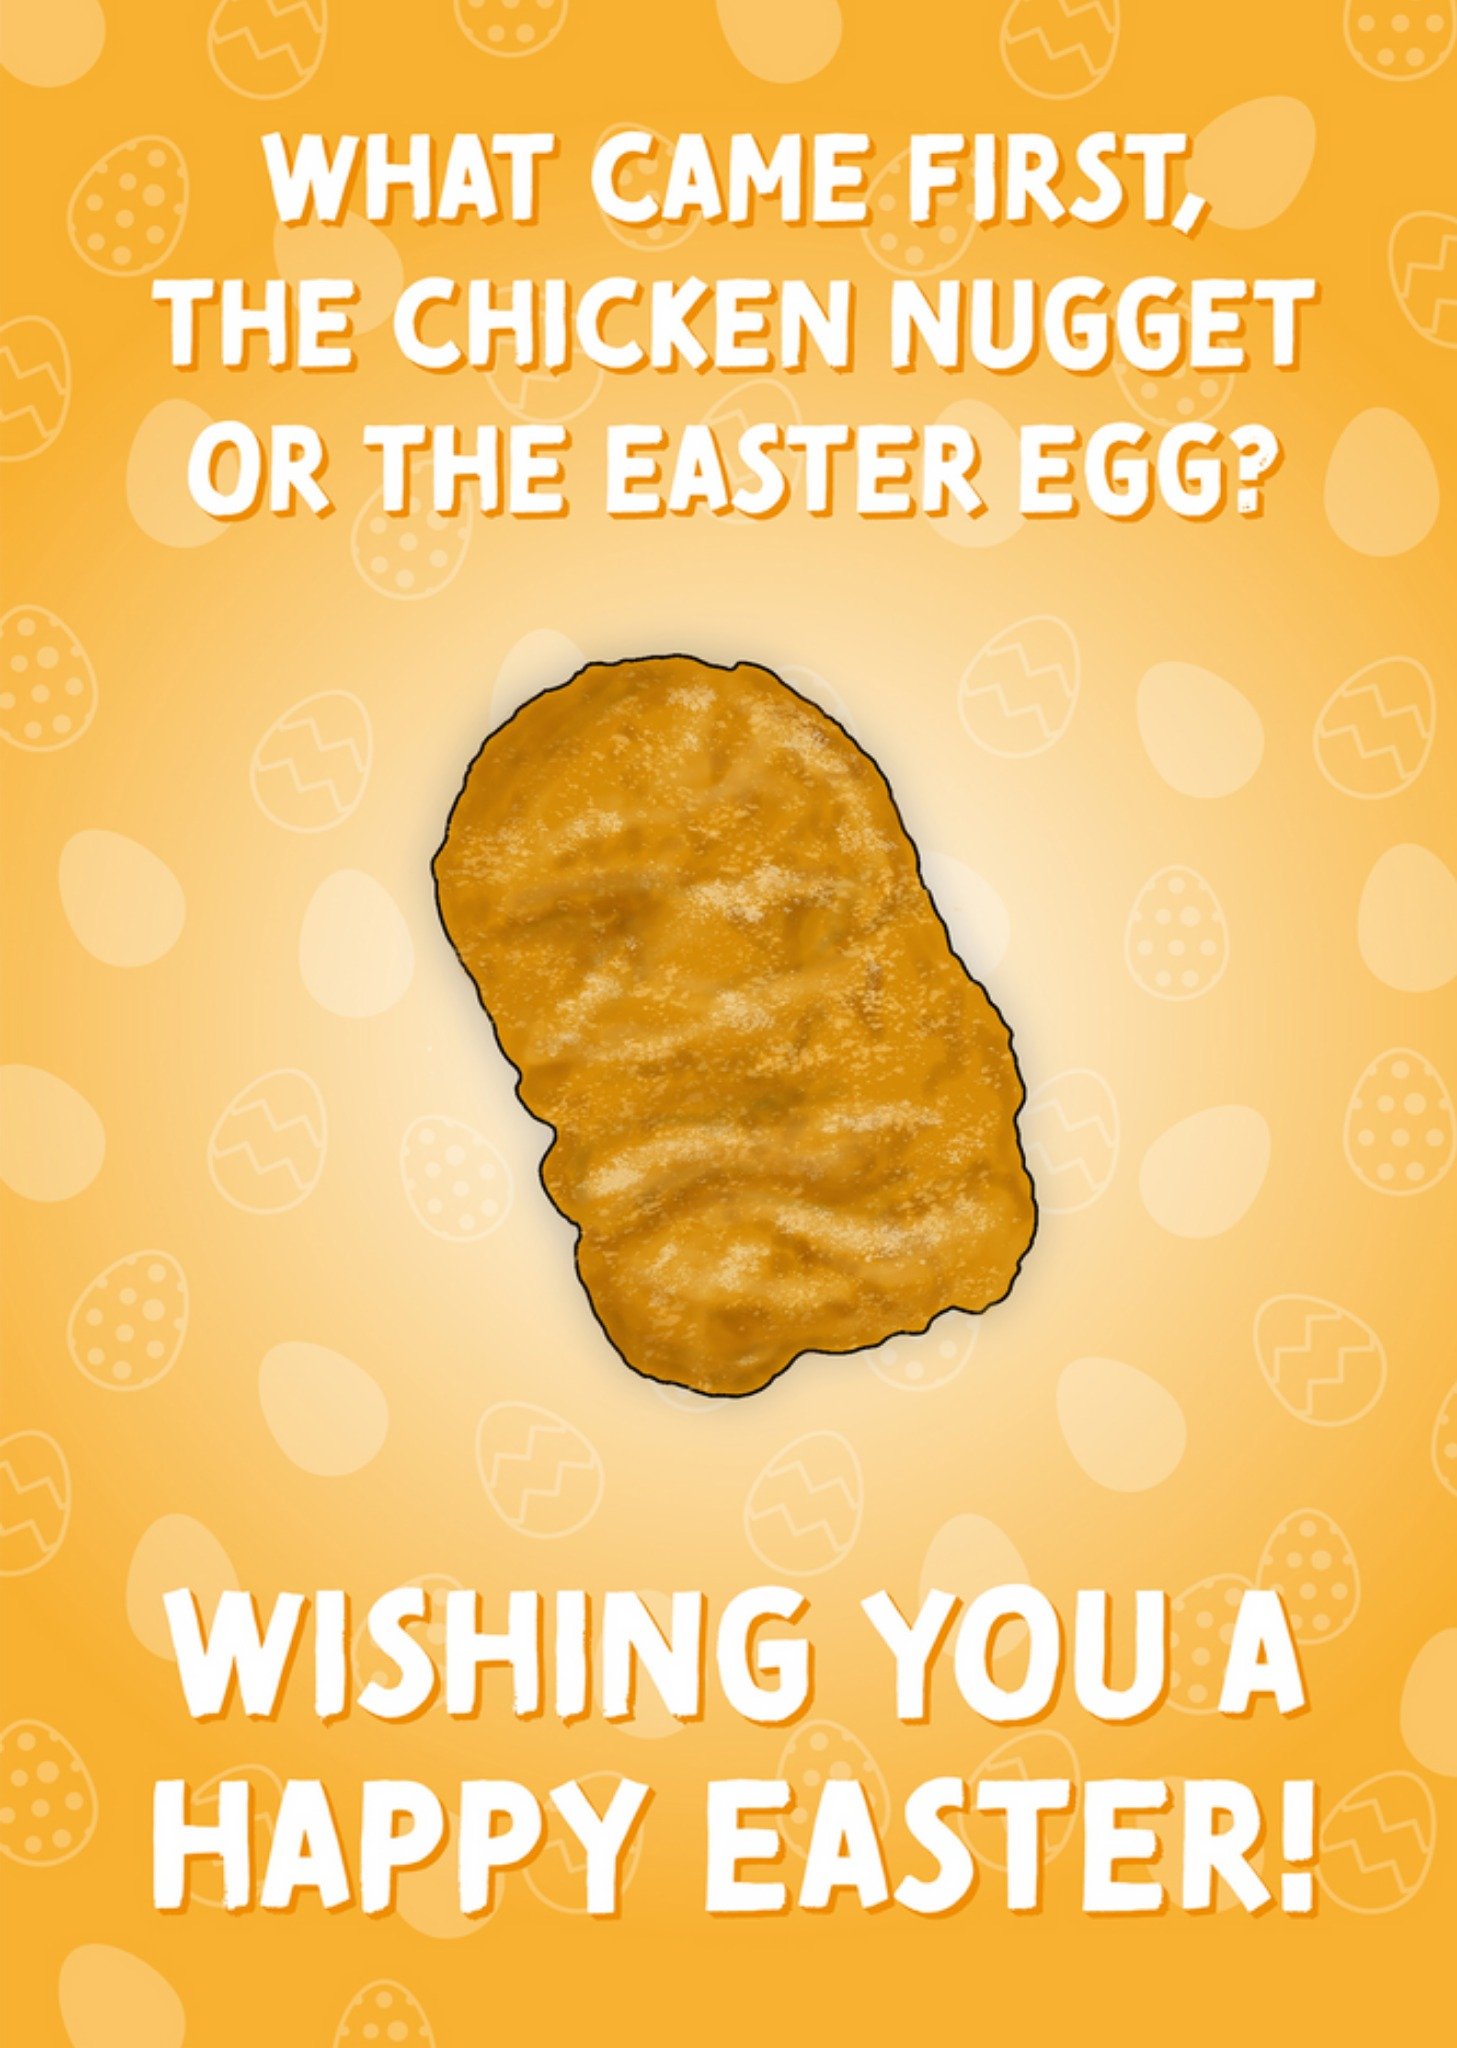 Moonpig Silly What Came First Chicken Nugget Or Easter Egg Card, Large